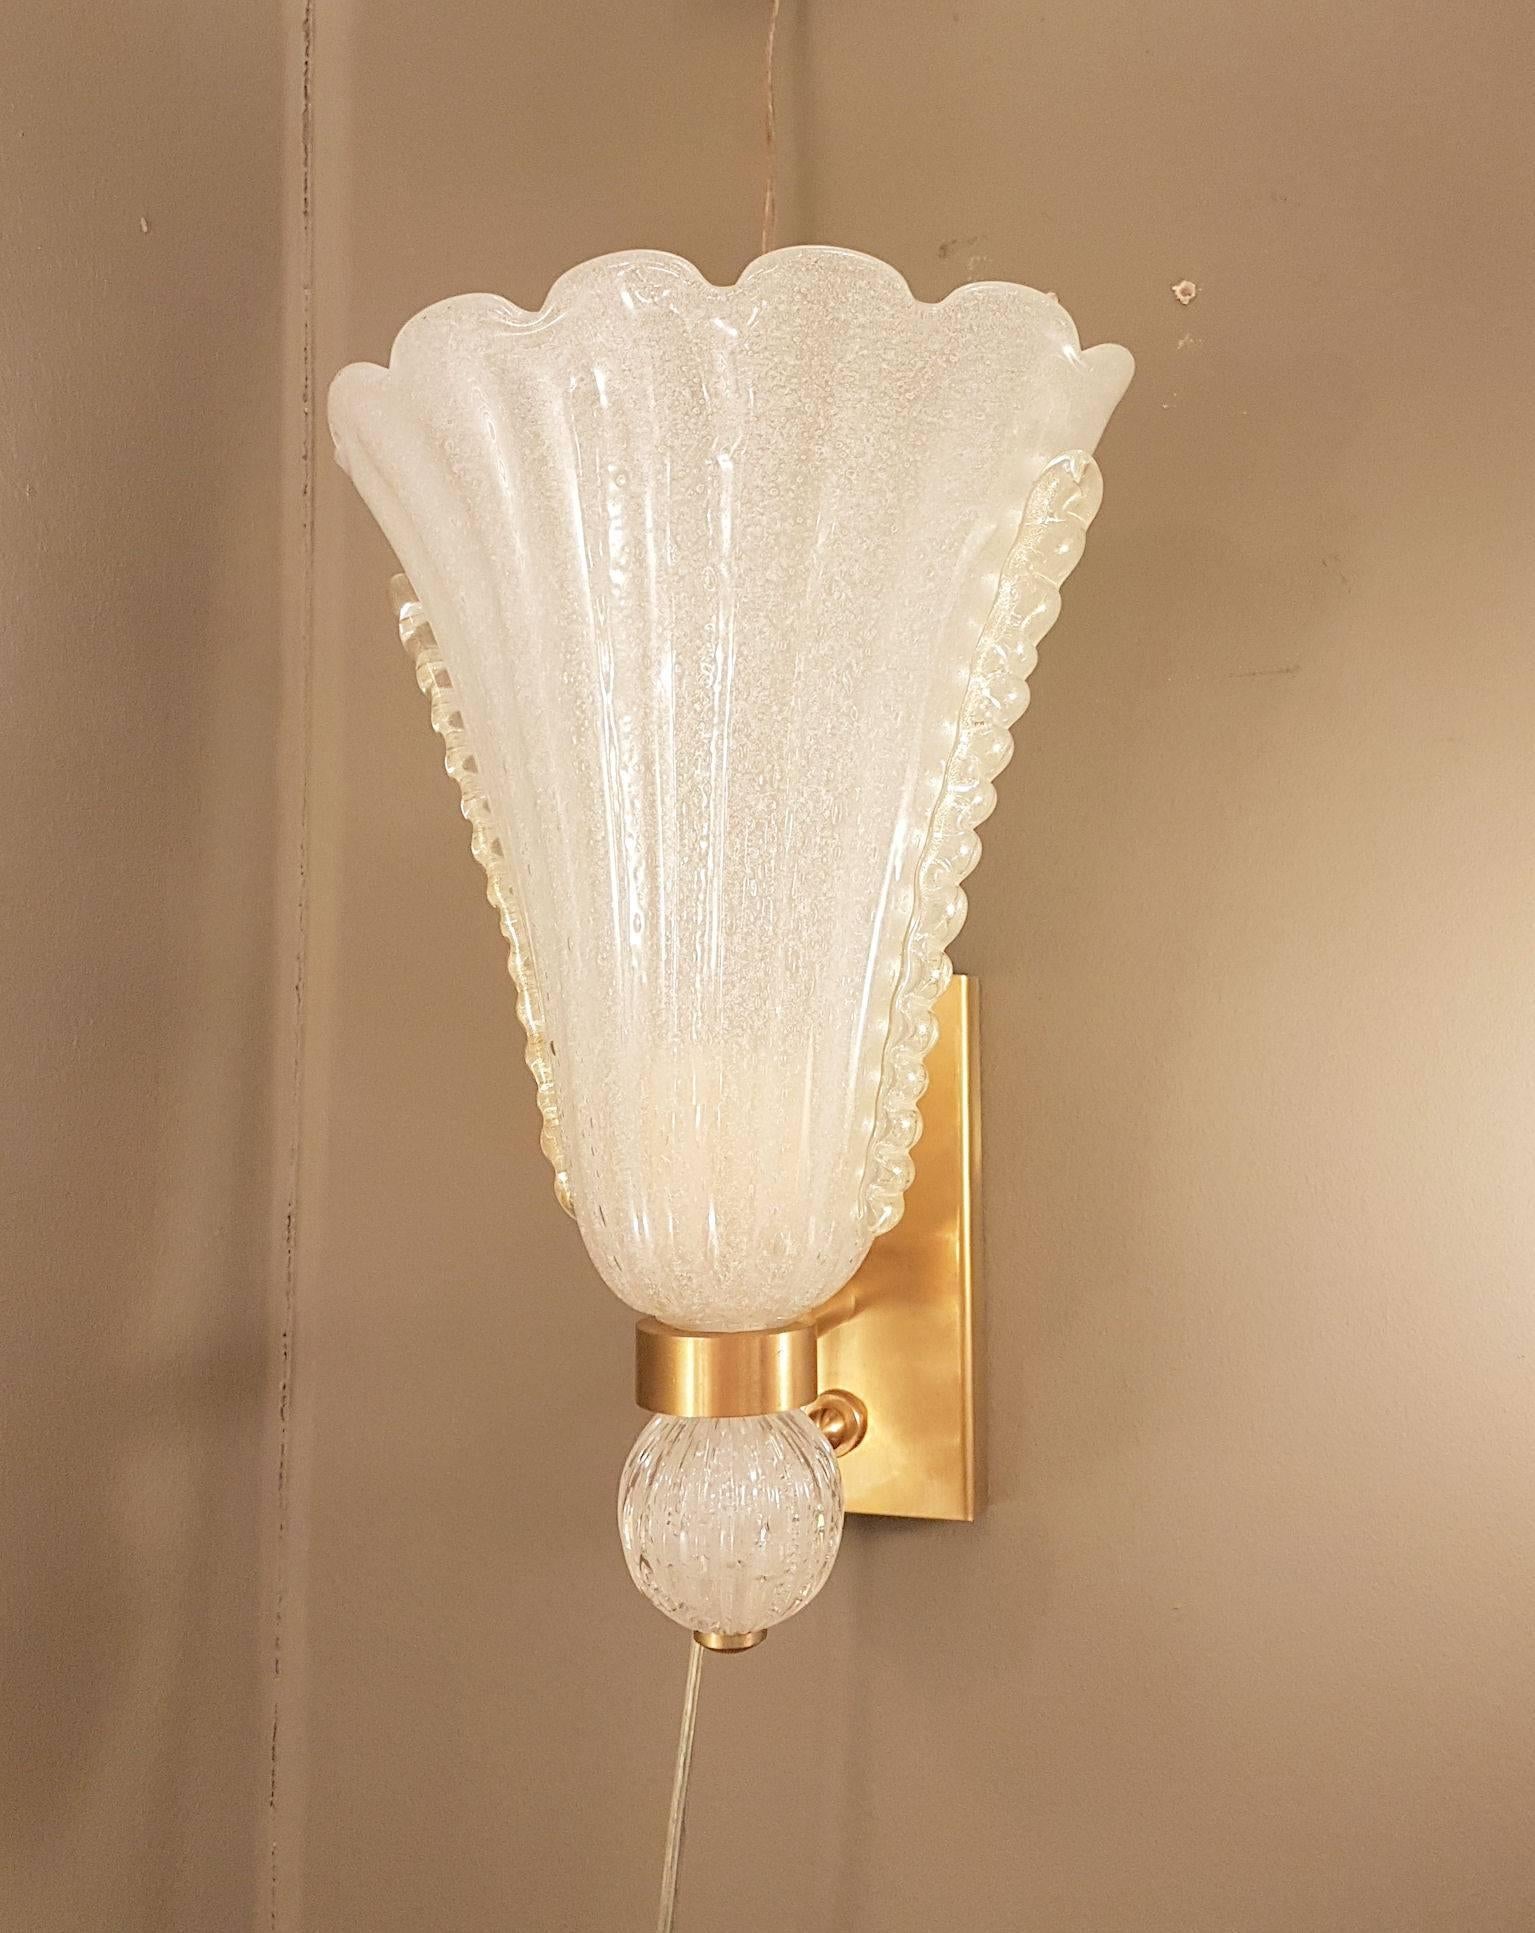 Pair of corolla shaped Murano glass Barovier e Toso sconces.
Italy, 1960s.
The Murano glass is Pulegoso, which means, that numerous irregular small air bubbles voluntarily make the glass translucent, with gold inclusions and brass mounts.
One